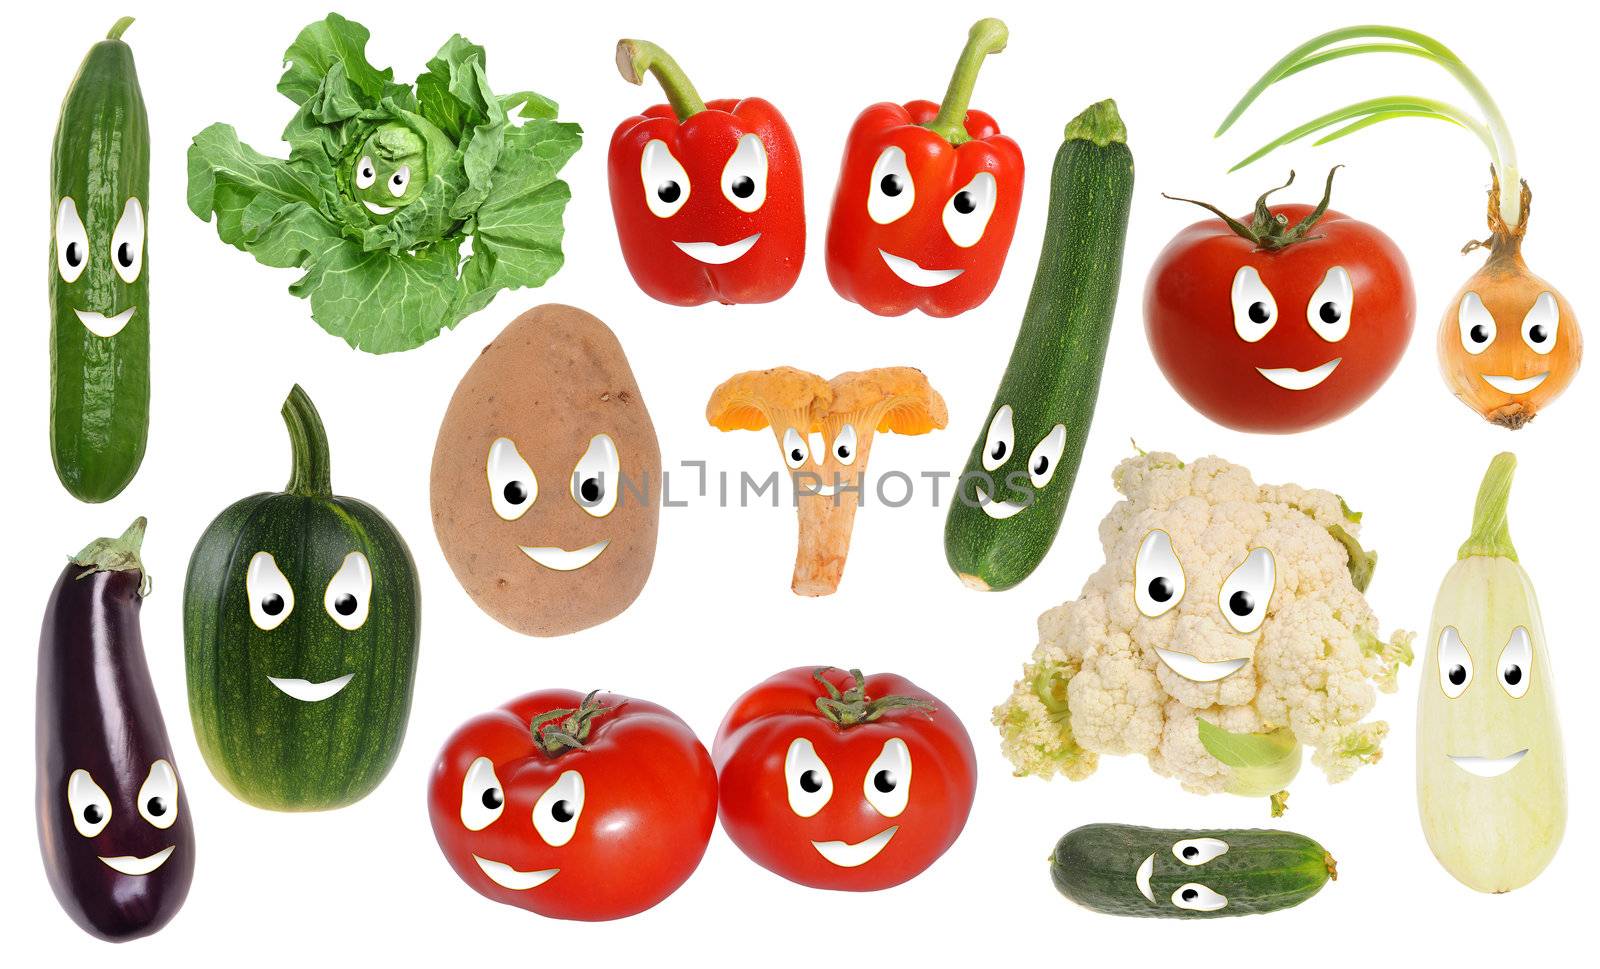 Assortment of happy vegetable smileys isolated on white background